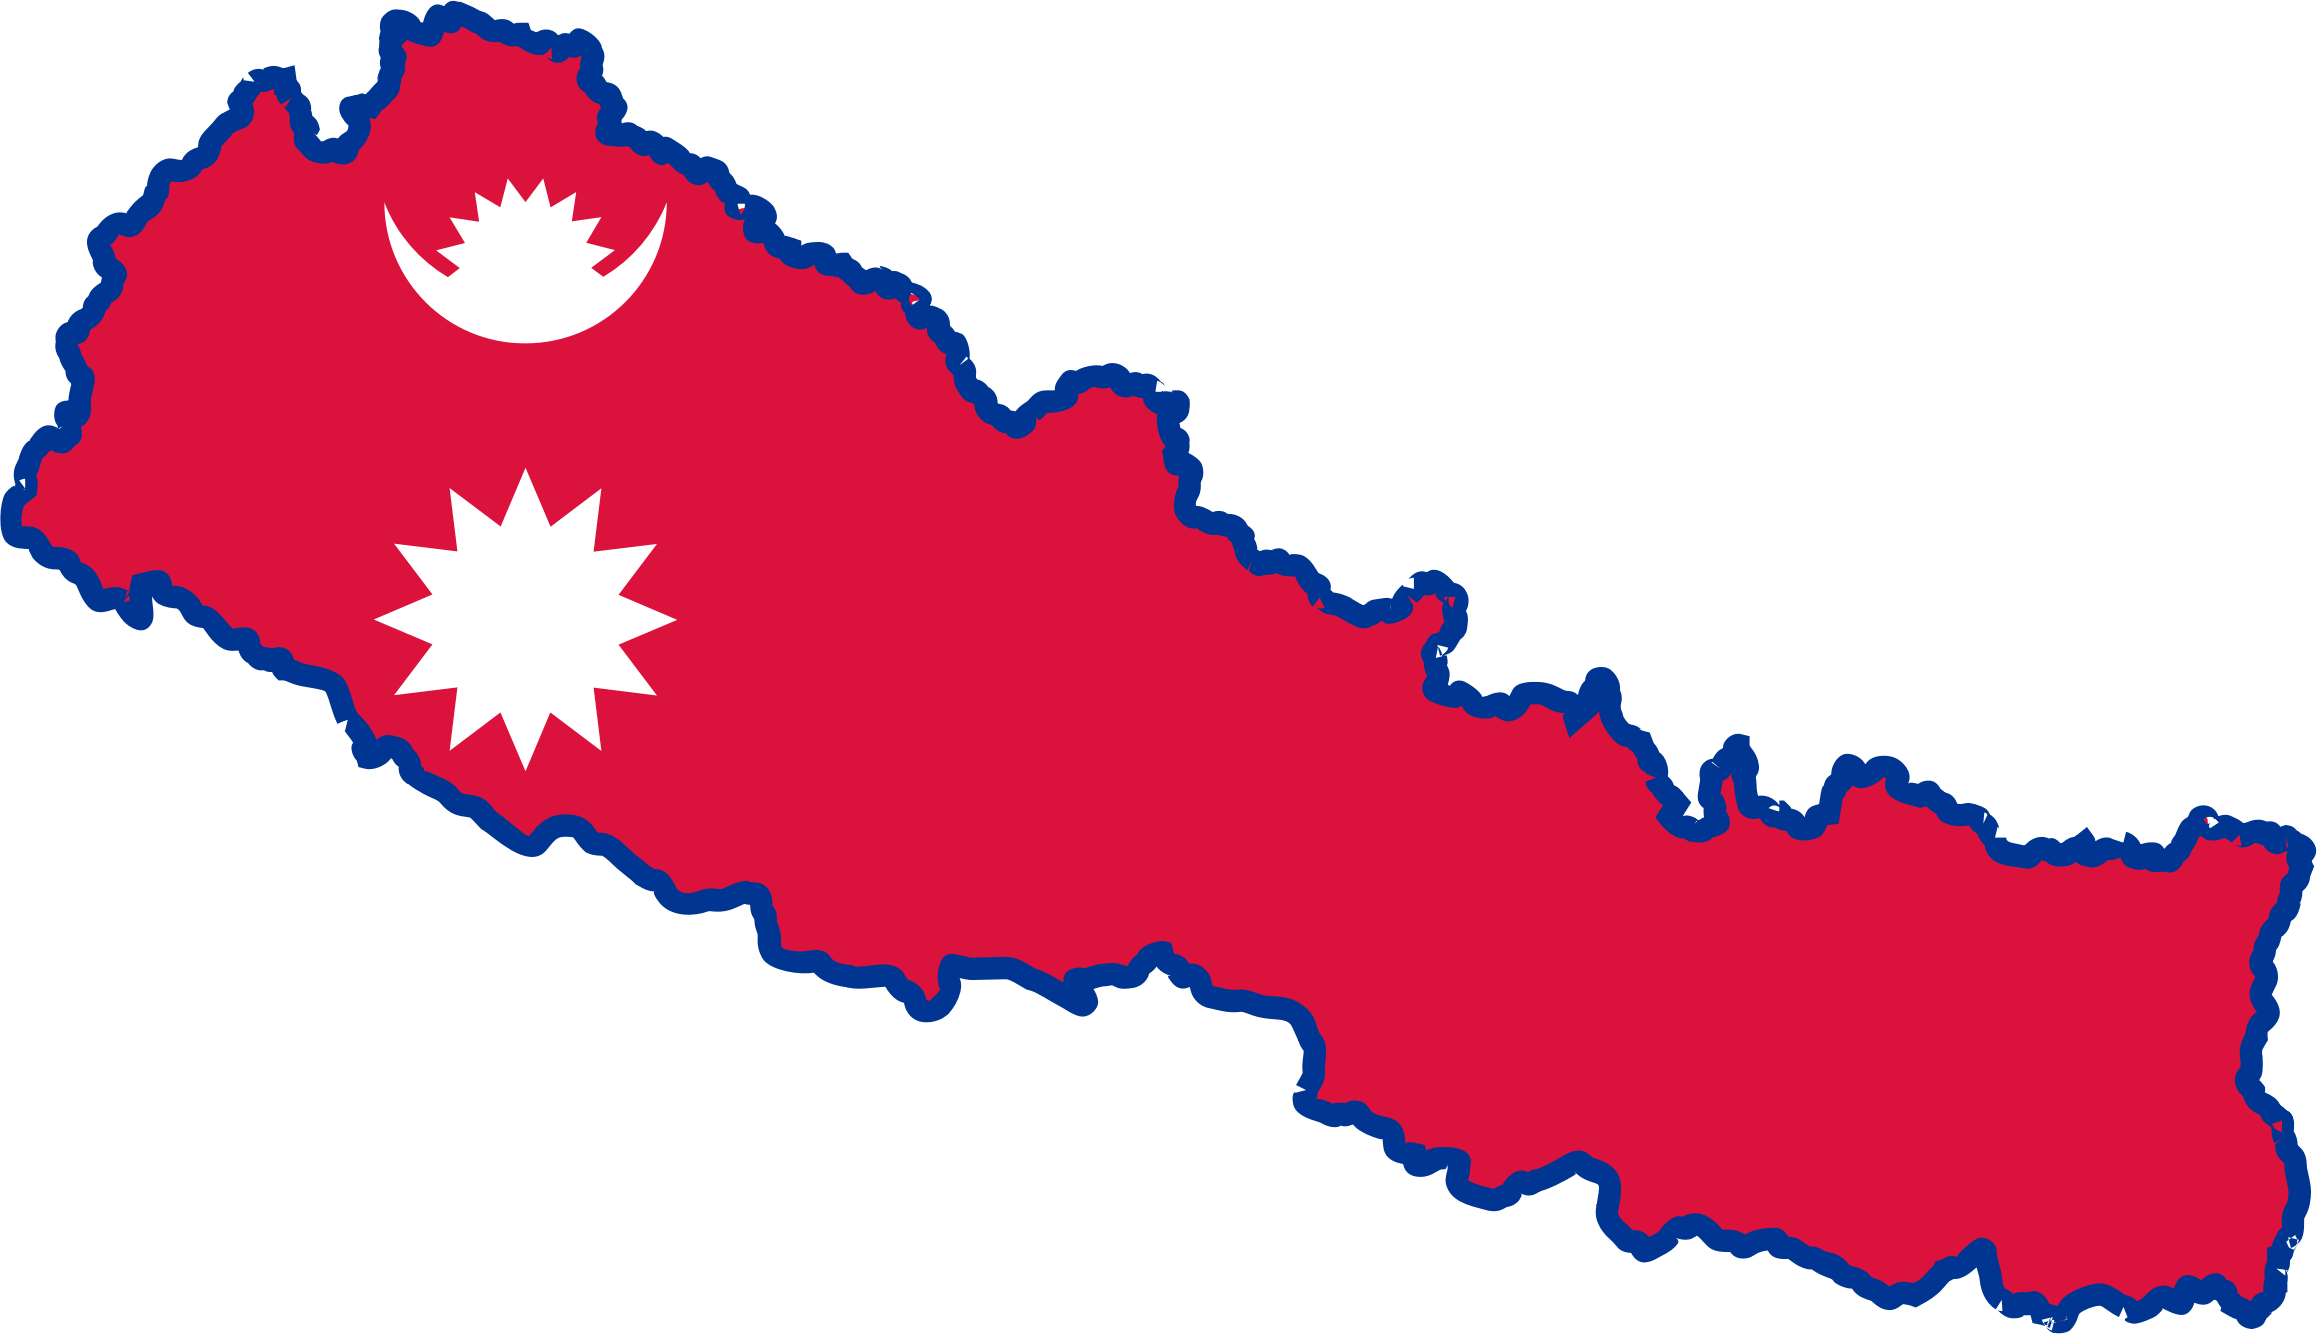 Nepal Map Flag - Nepali Map With Flag (2317x1334)